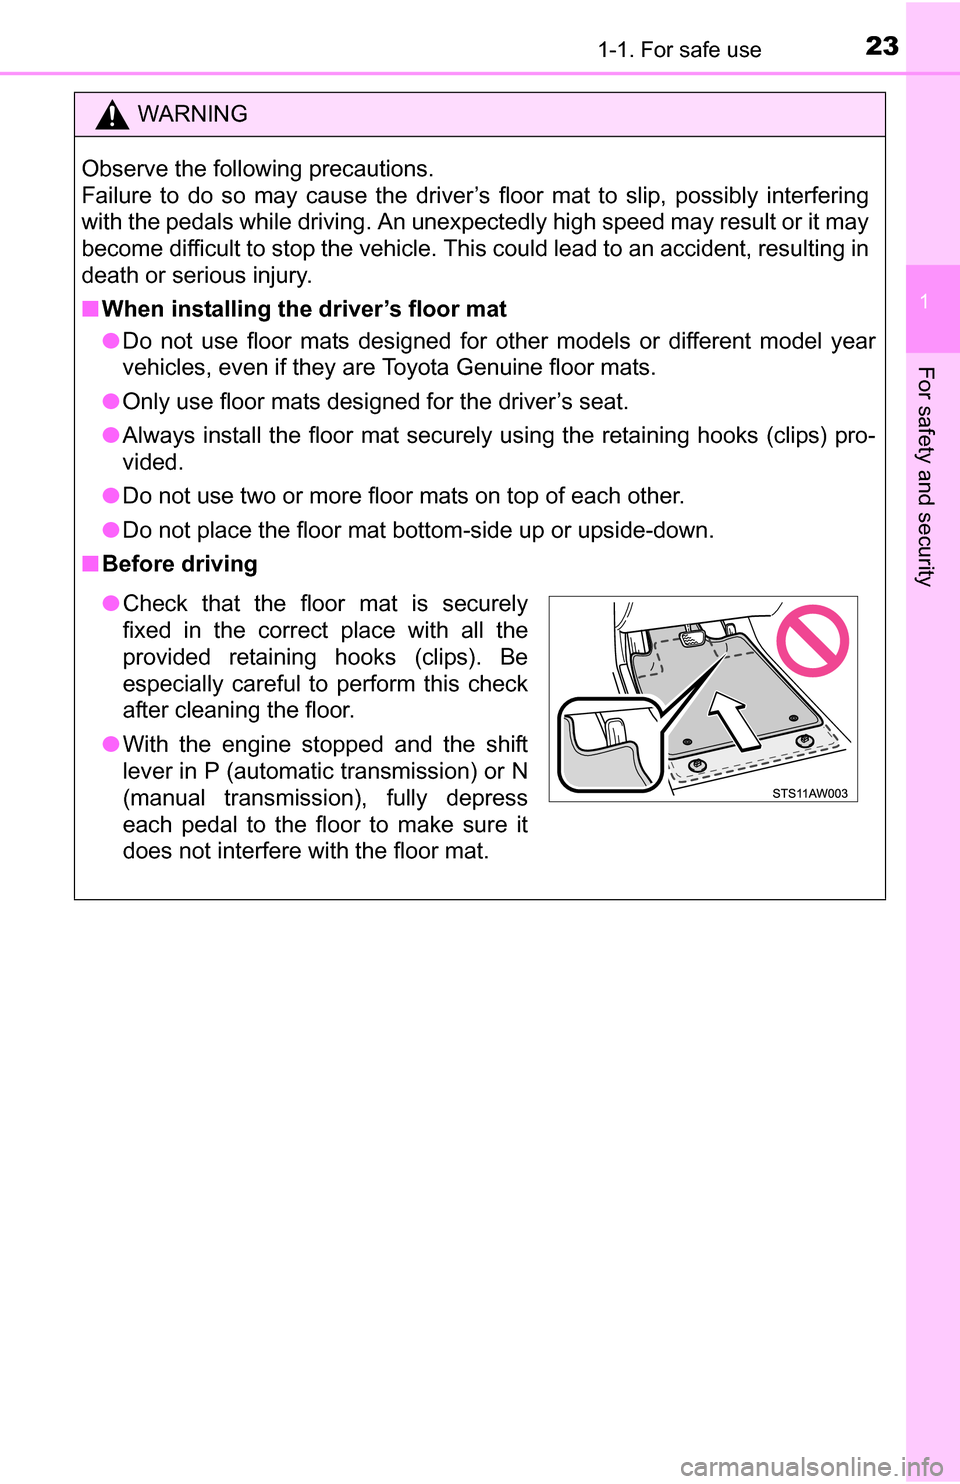 TOYOTA YARIS 2016 3.G Owners Manual 231-1. For safe use
1
For safety and security
WARNING
Observe the following precautions. 
Failure to do so may cause the driver’s floor mat to slip, possibly interfering
with the pedals while drivin